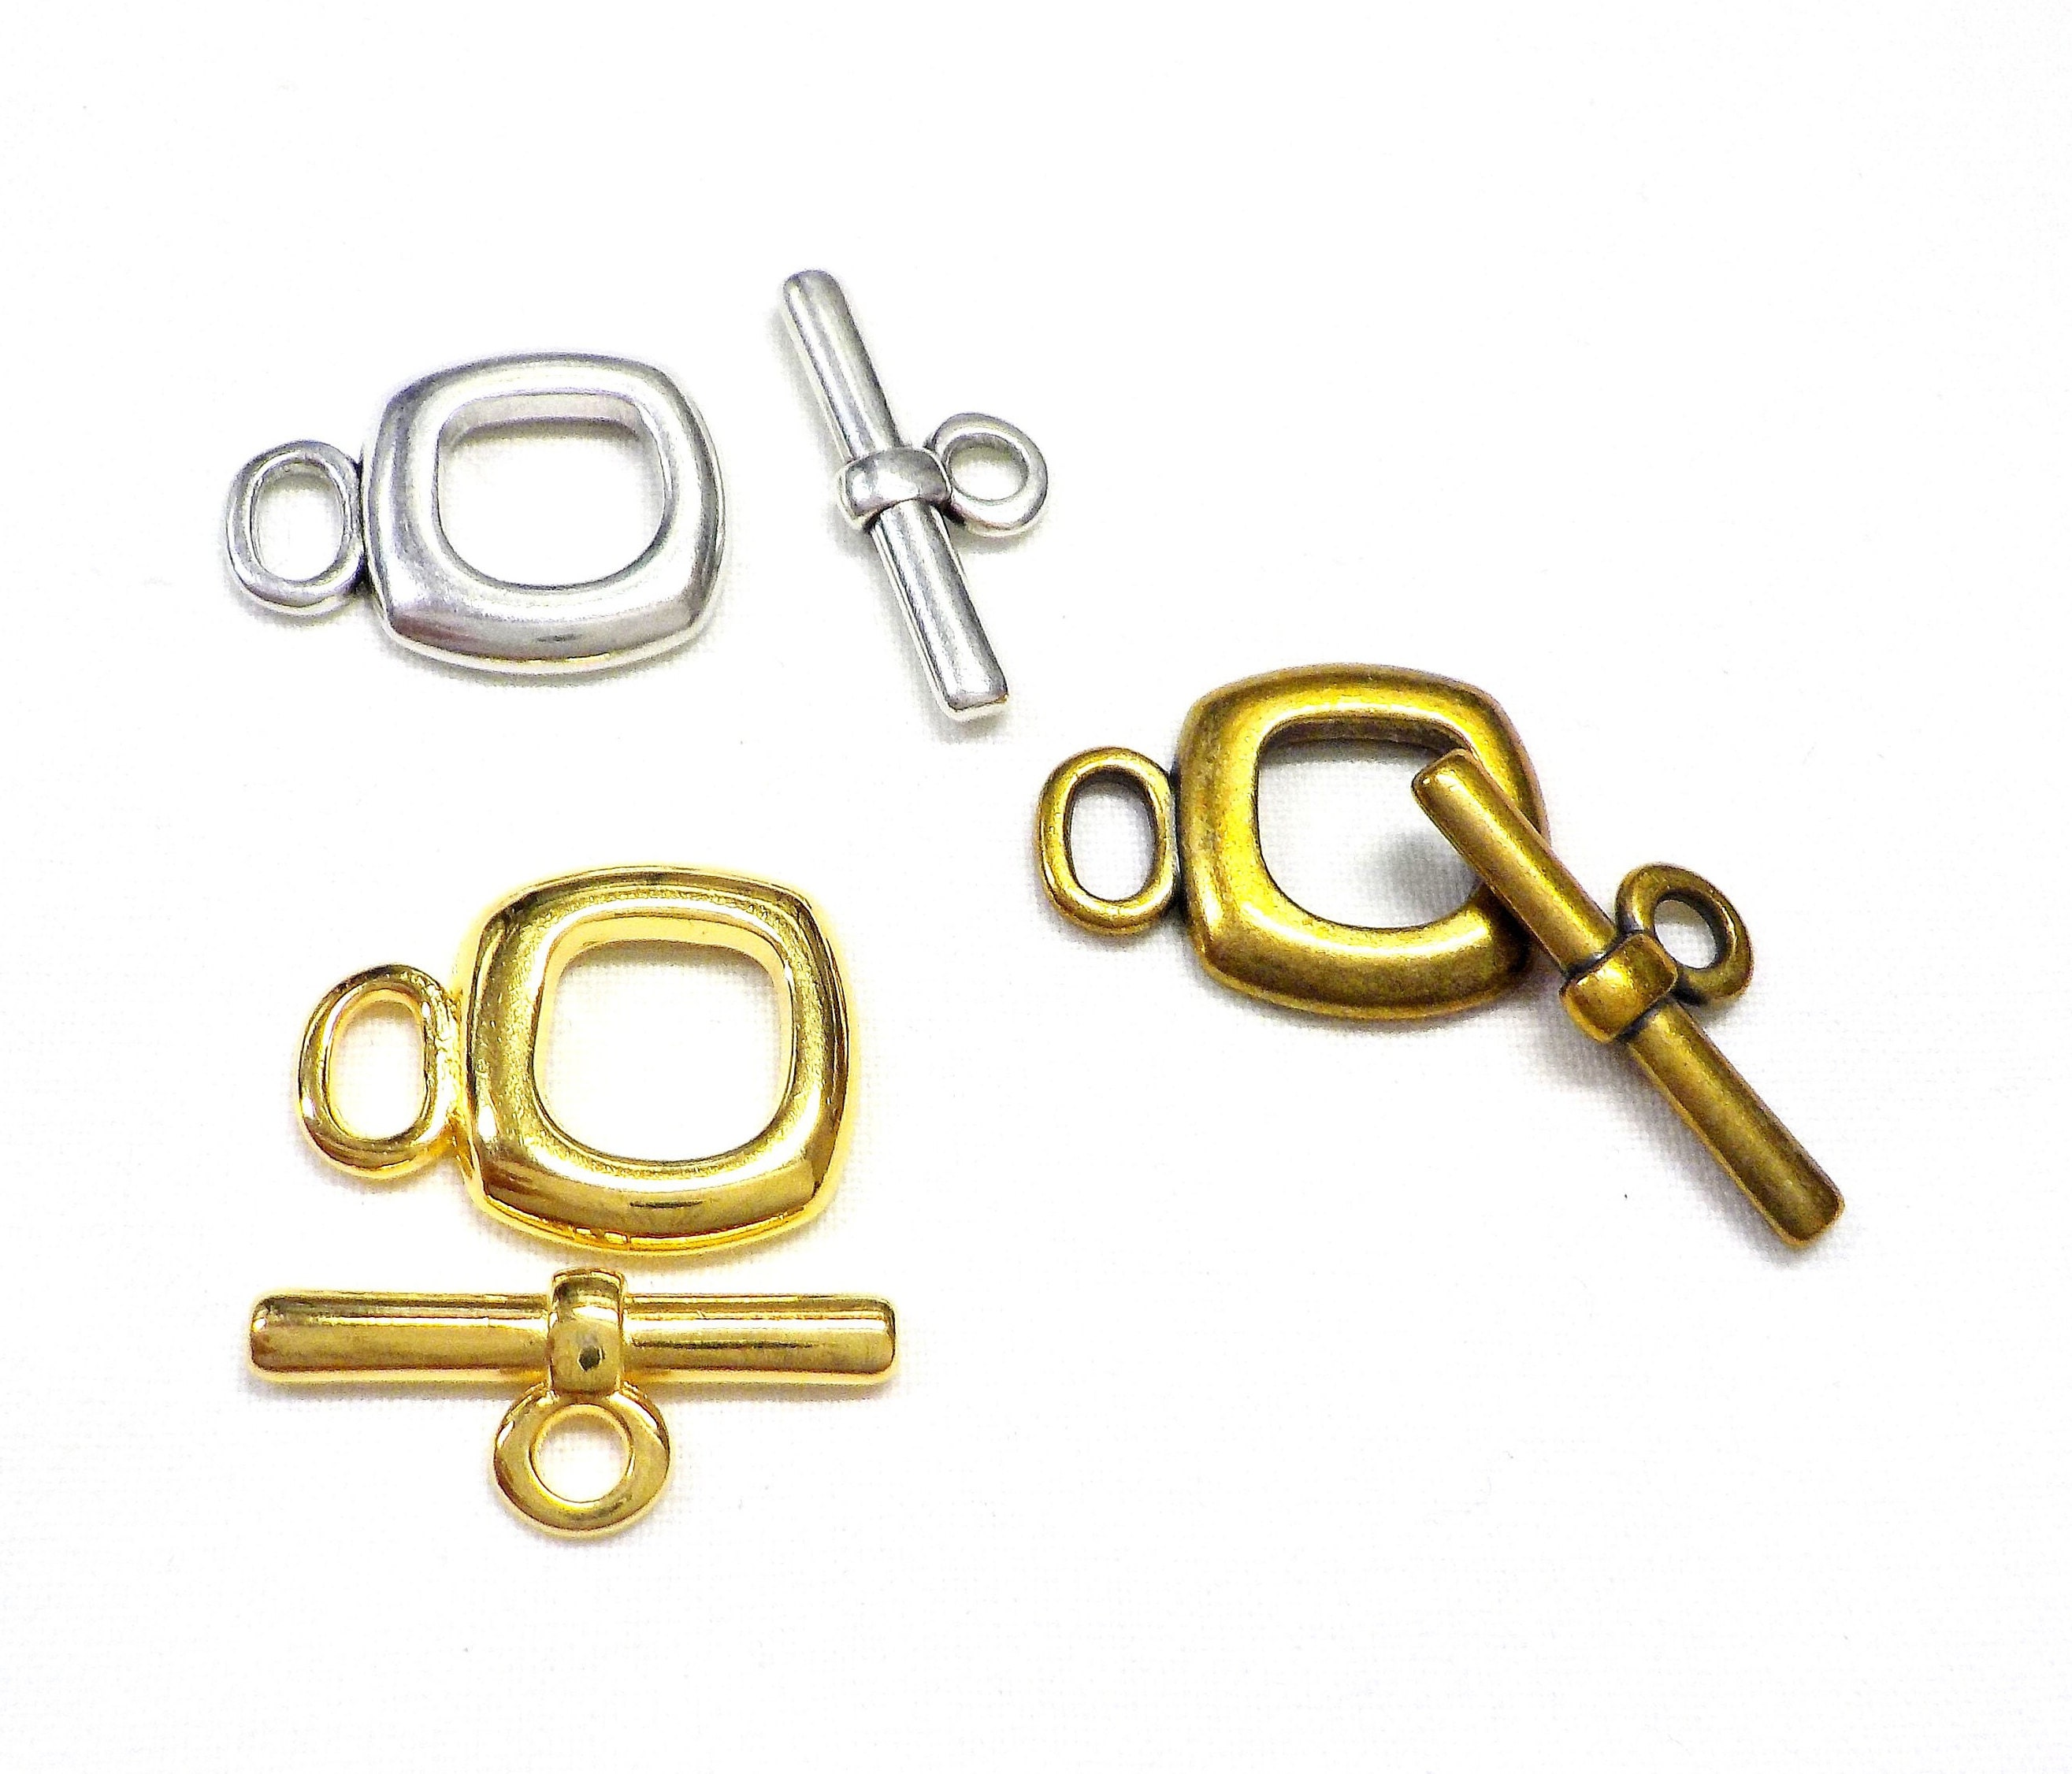 Toggle clasps gold, T bar ring, large 24K gold plated jewelry clasp,  necklace clasps, bracelet clasp, closures for necklaces bracelets, T5